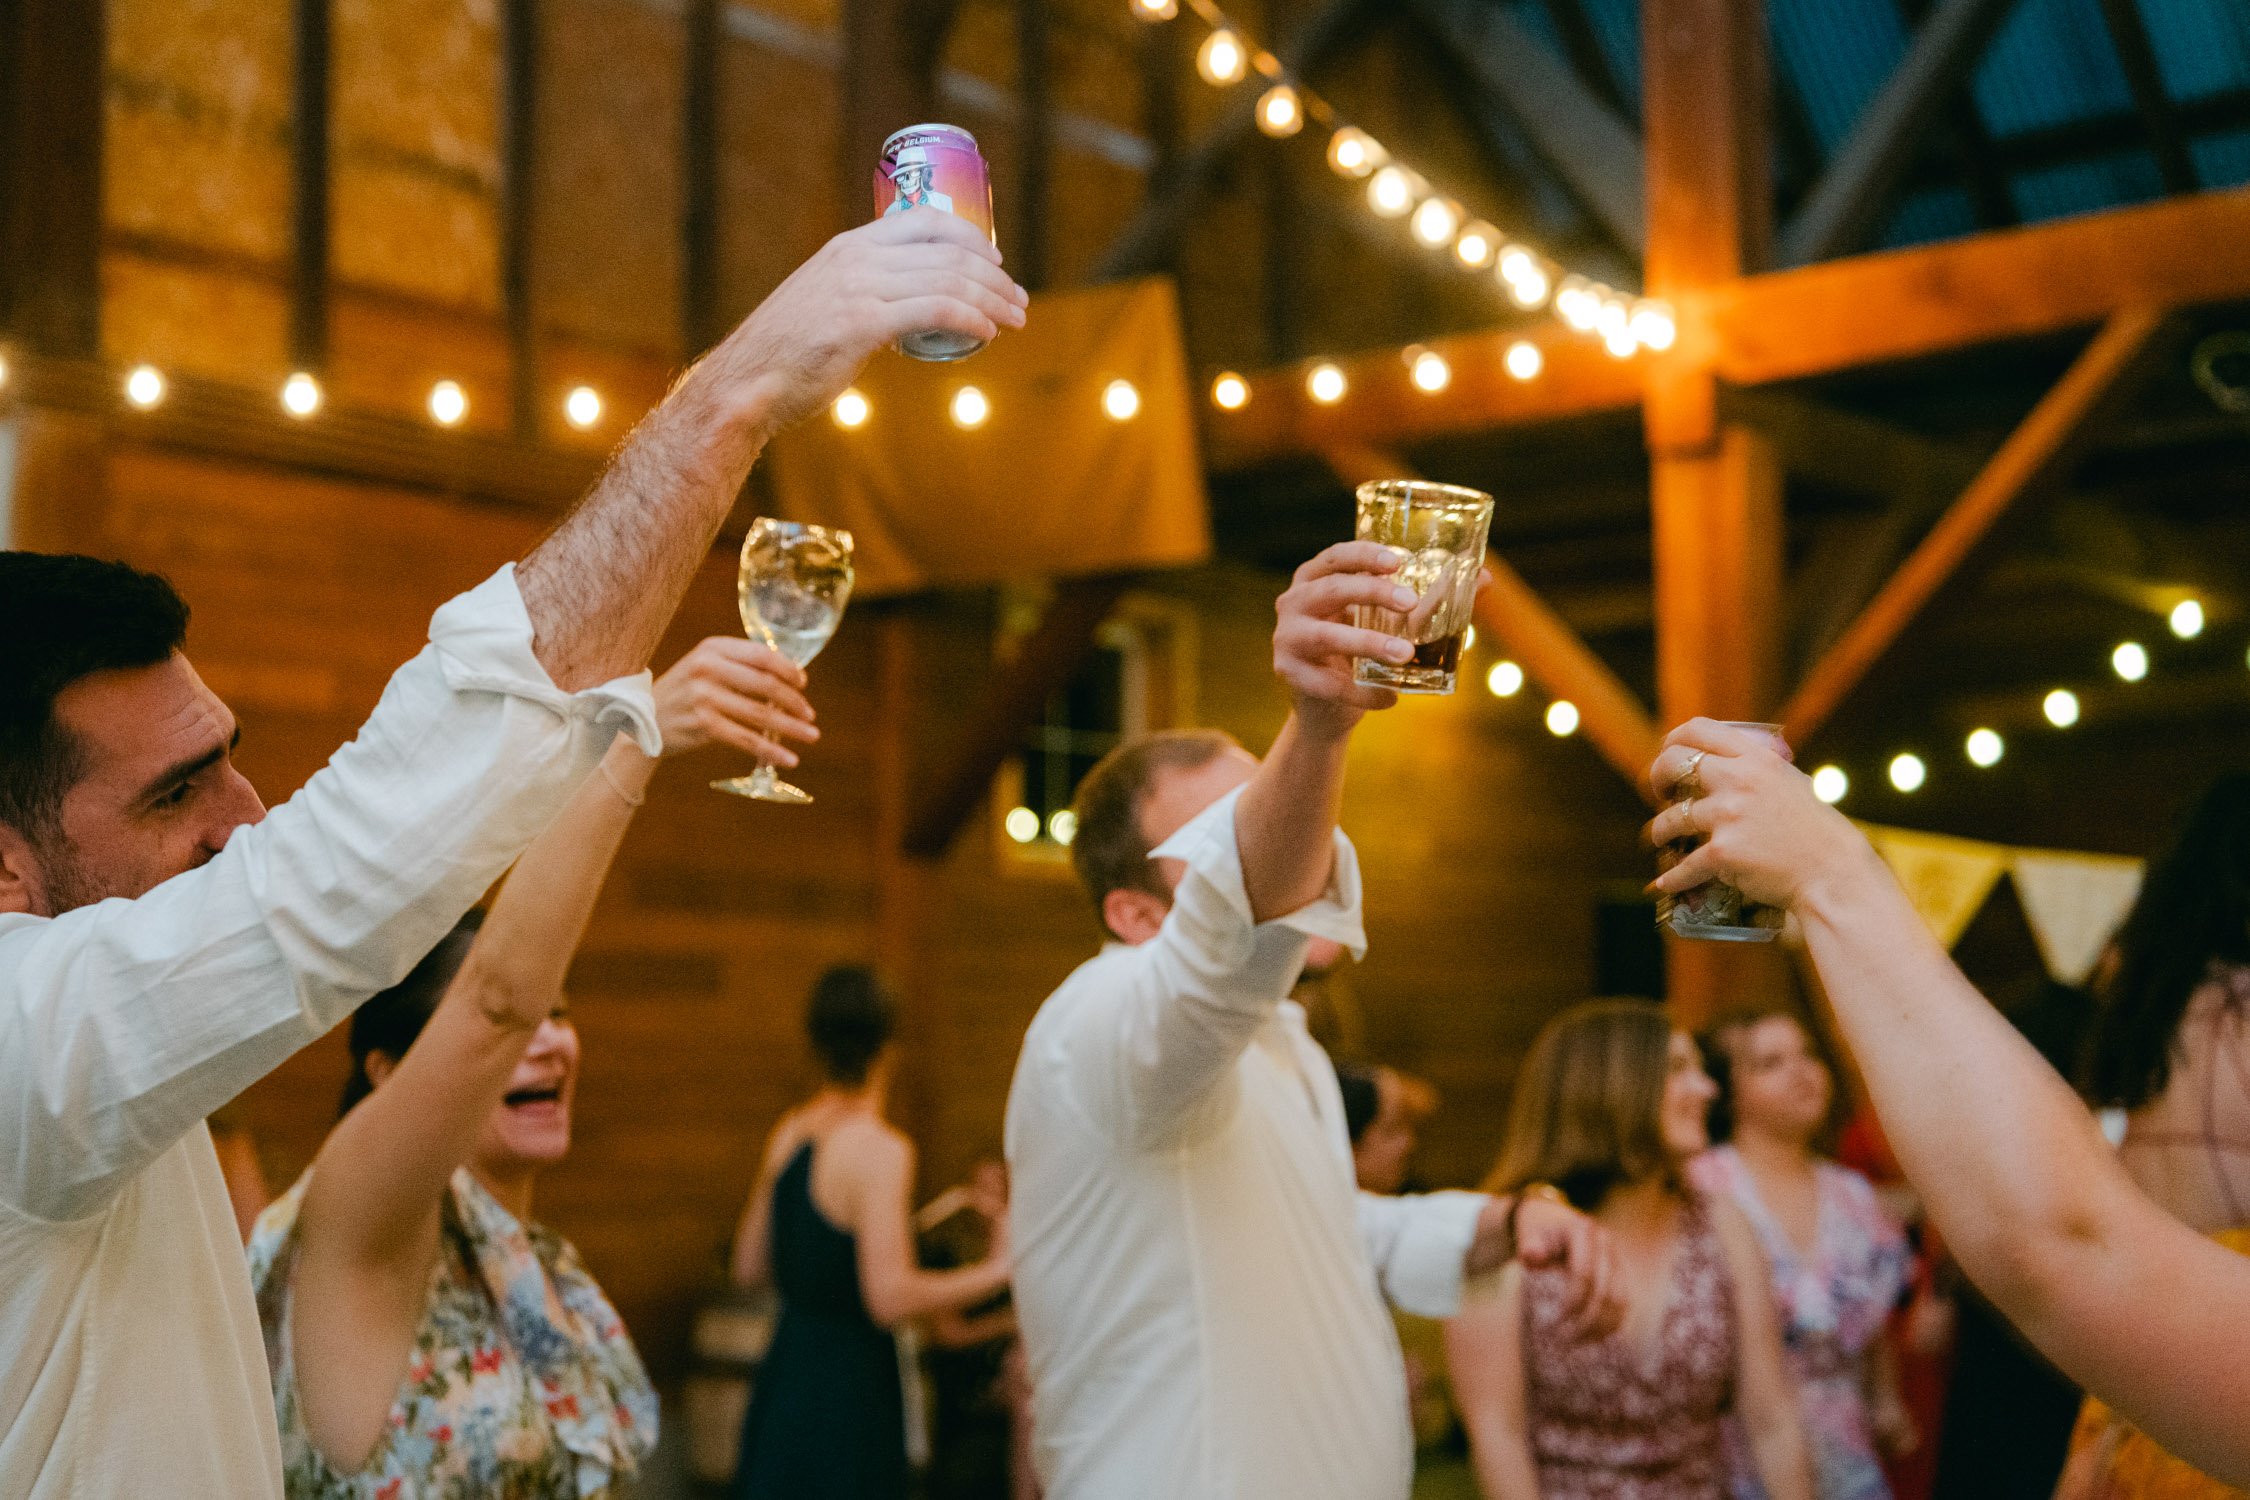 graeagle corner barn wedding, photo of the guests doing a toasts during the evening reception